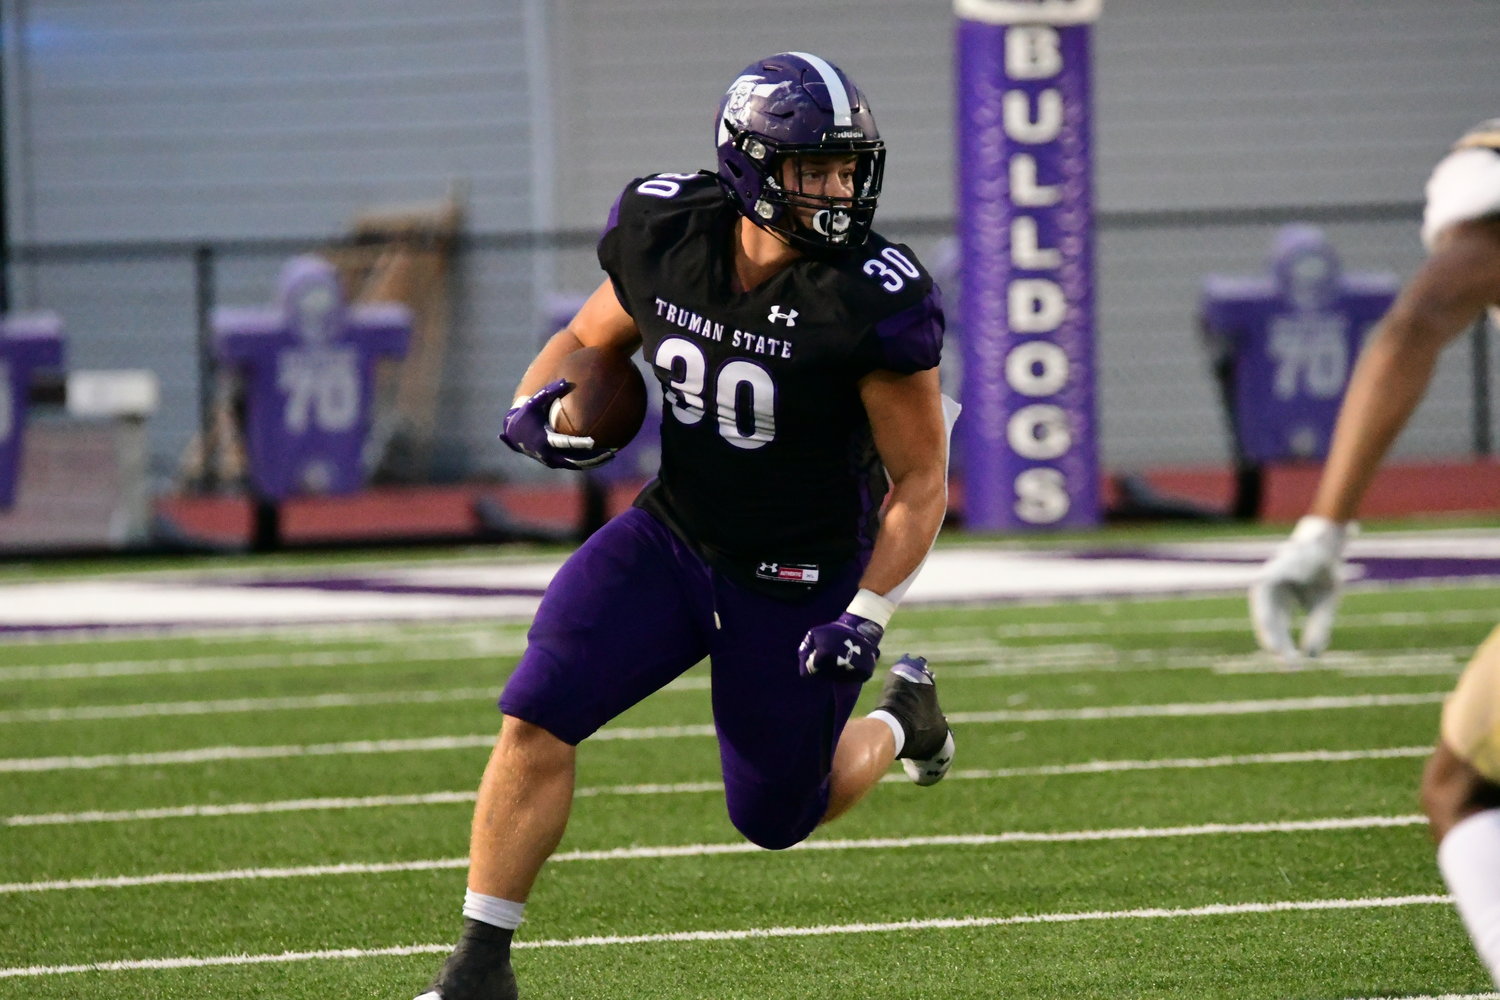 Daily Express file photo of Truman senior fullback Jacob Morris from a game this season against Lindenwood.